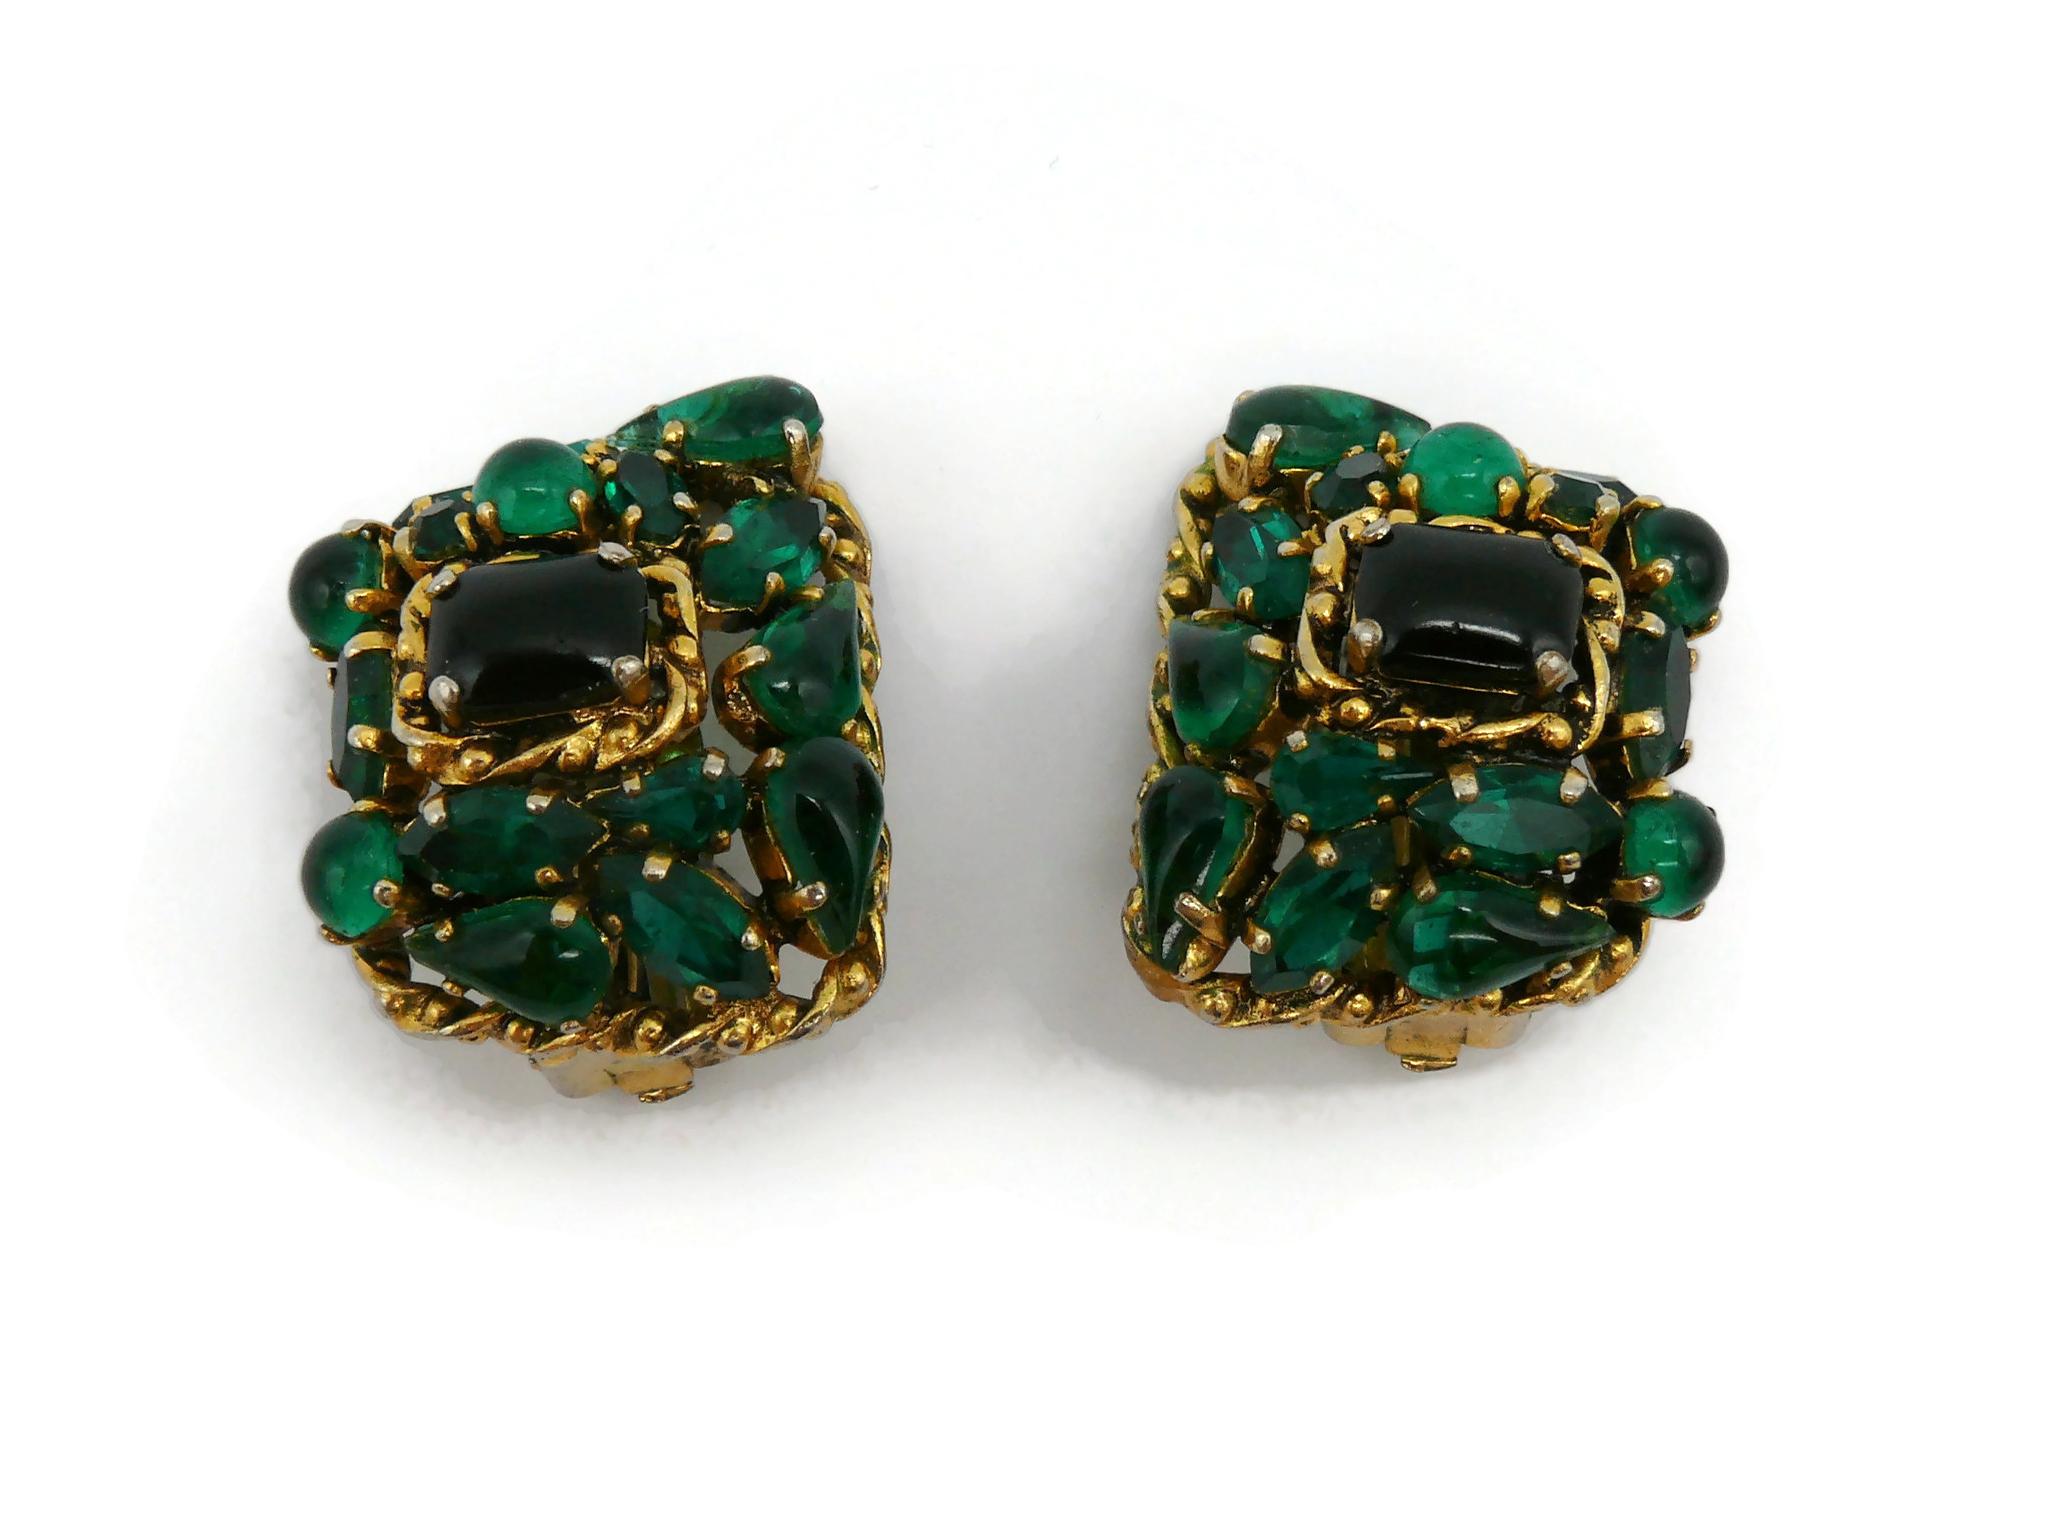 CHRISTIAN DIOR Vintage Jewelled Clip-On Earrings, 1963 For Sale 1